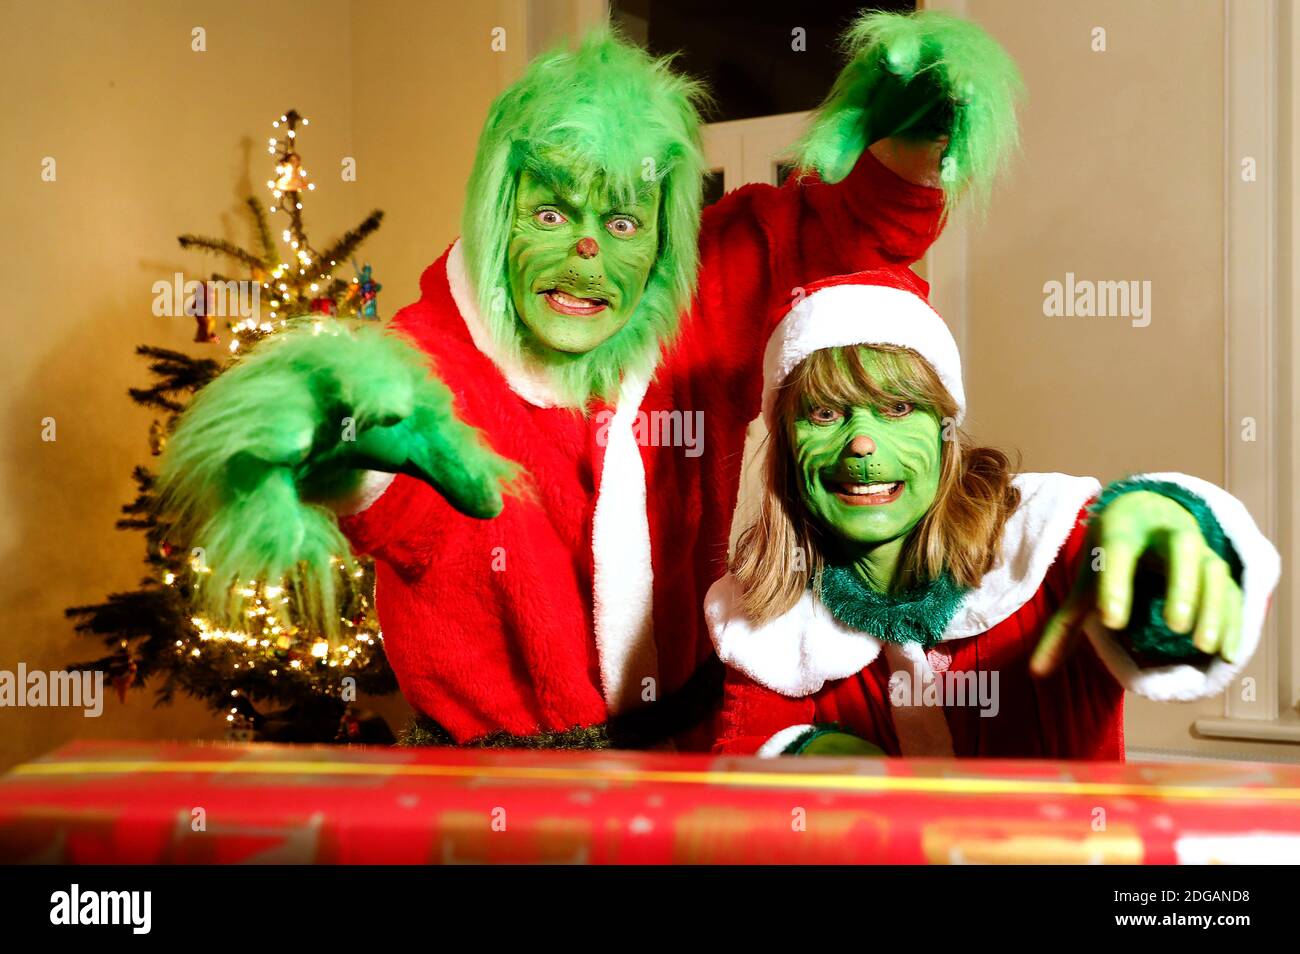 GEEK ART - Bodypainting and Transformaking: 'The Grinch steals Weihafterten' Photoshooting with Enrico Lein as Grinch and Maria Skupin as Frau Grinch in the Villa Czarnecki. Hamelin, December 7th, 2020 - A project by the photographer Tschiponnique Skupin and the bodypainters and transformers Enrico Lein | usage worldwide Stock Photo